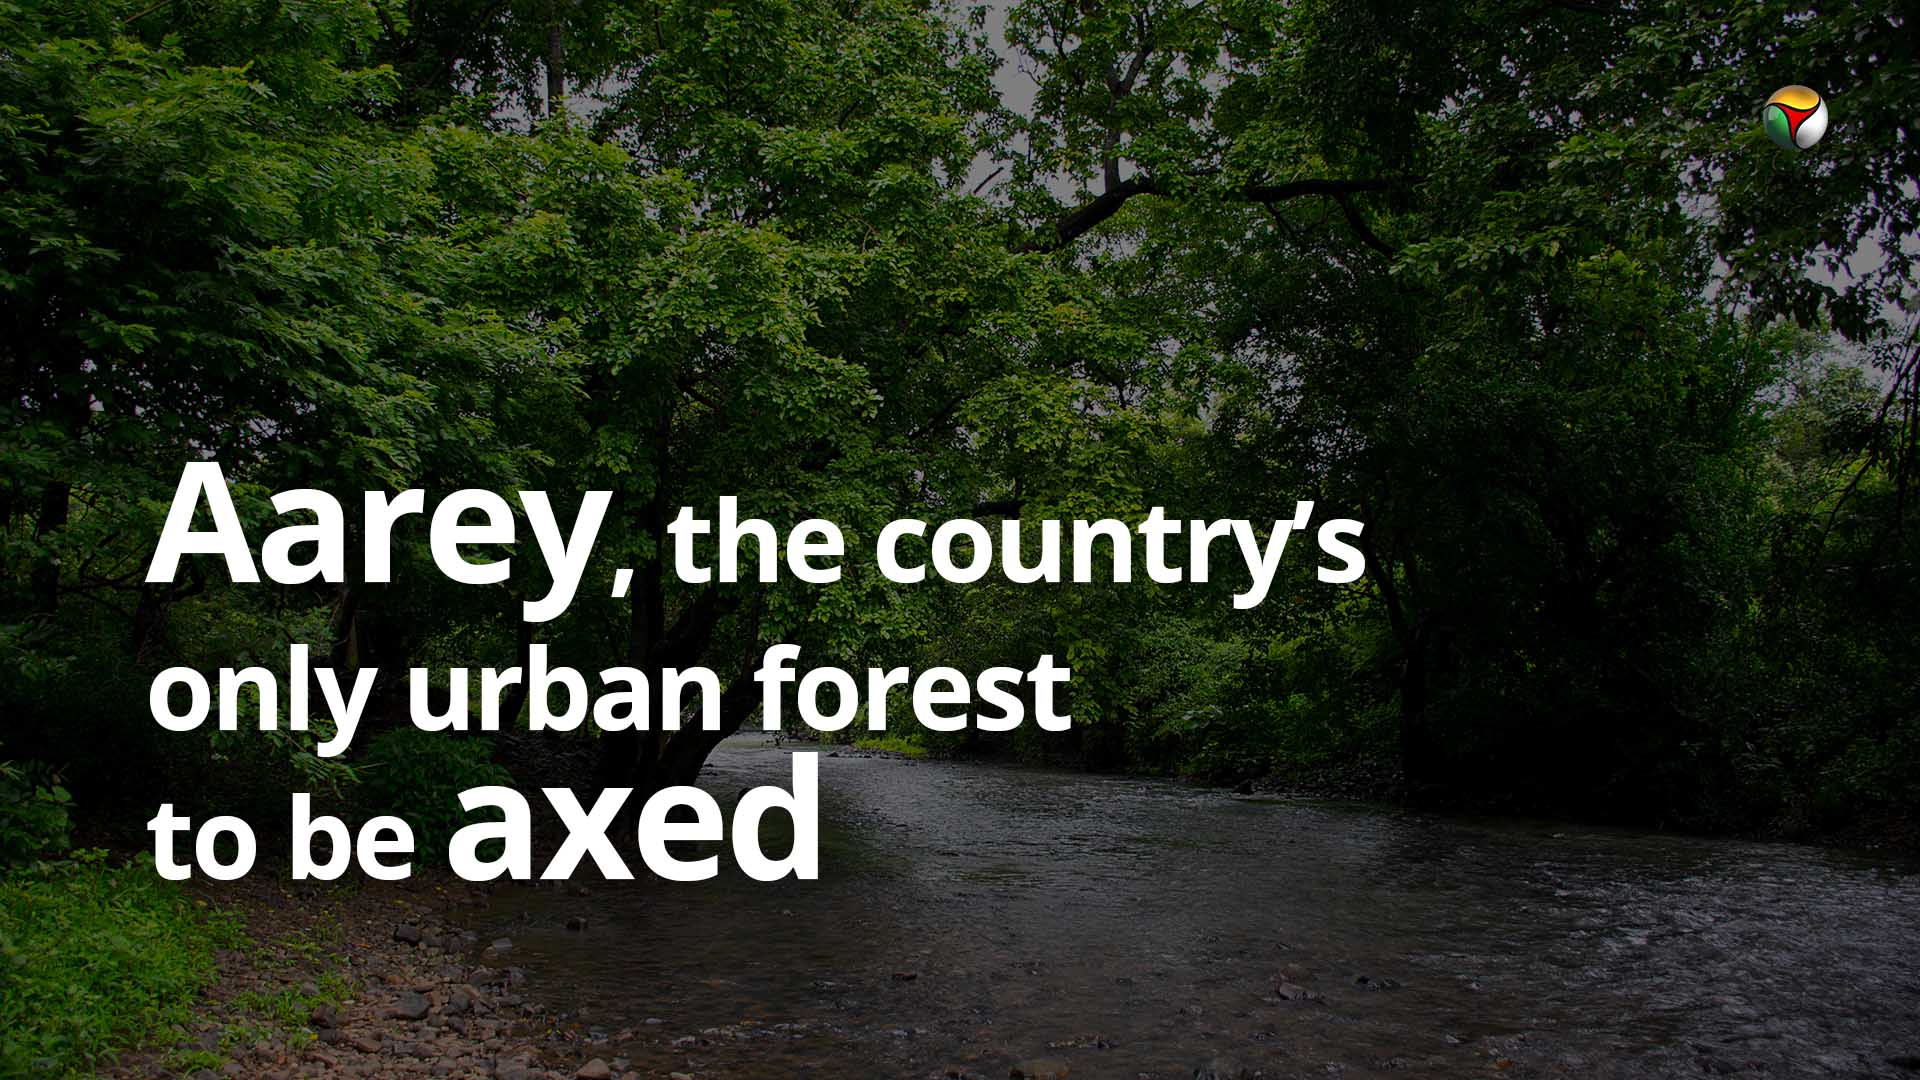 Aarey, the countrys only urban forest to be axed!